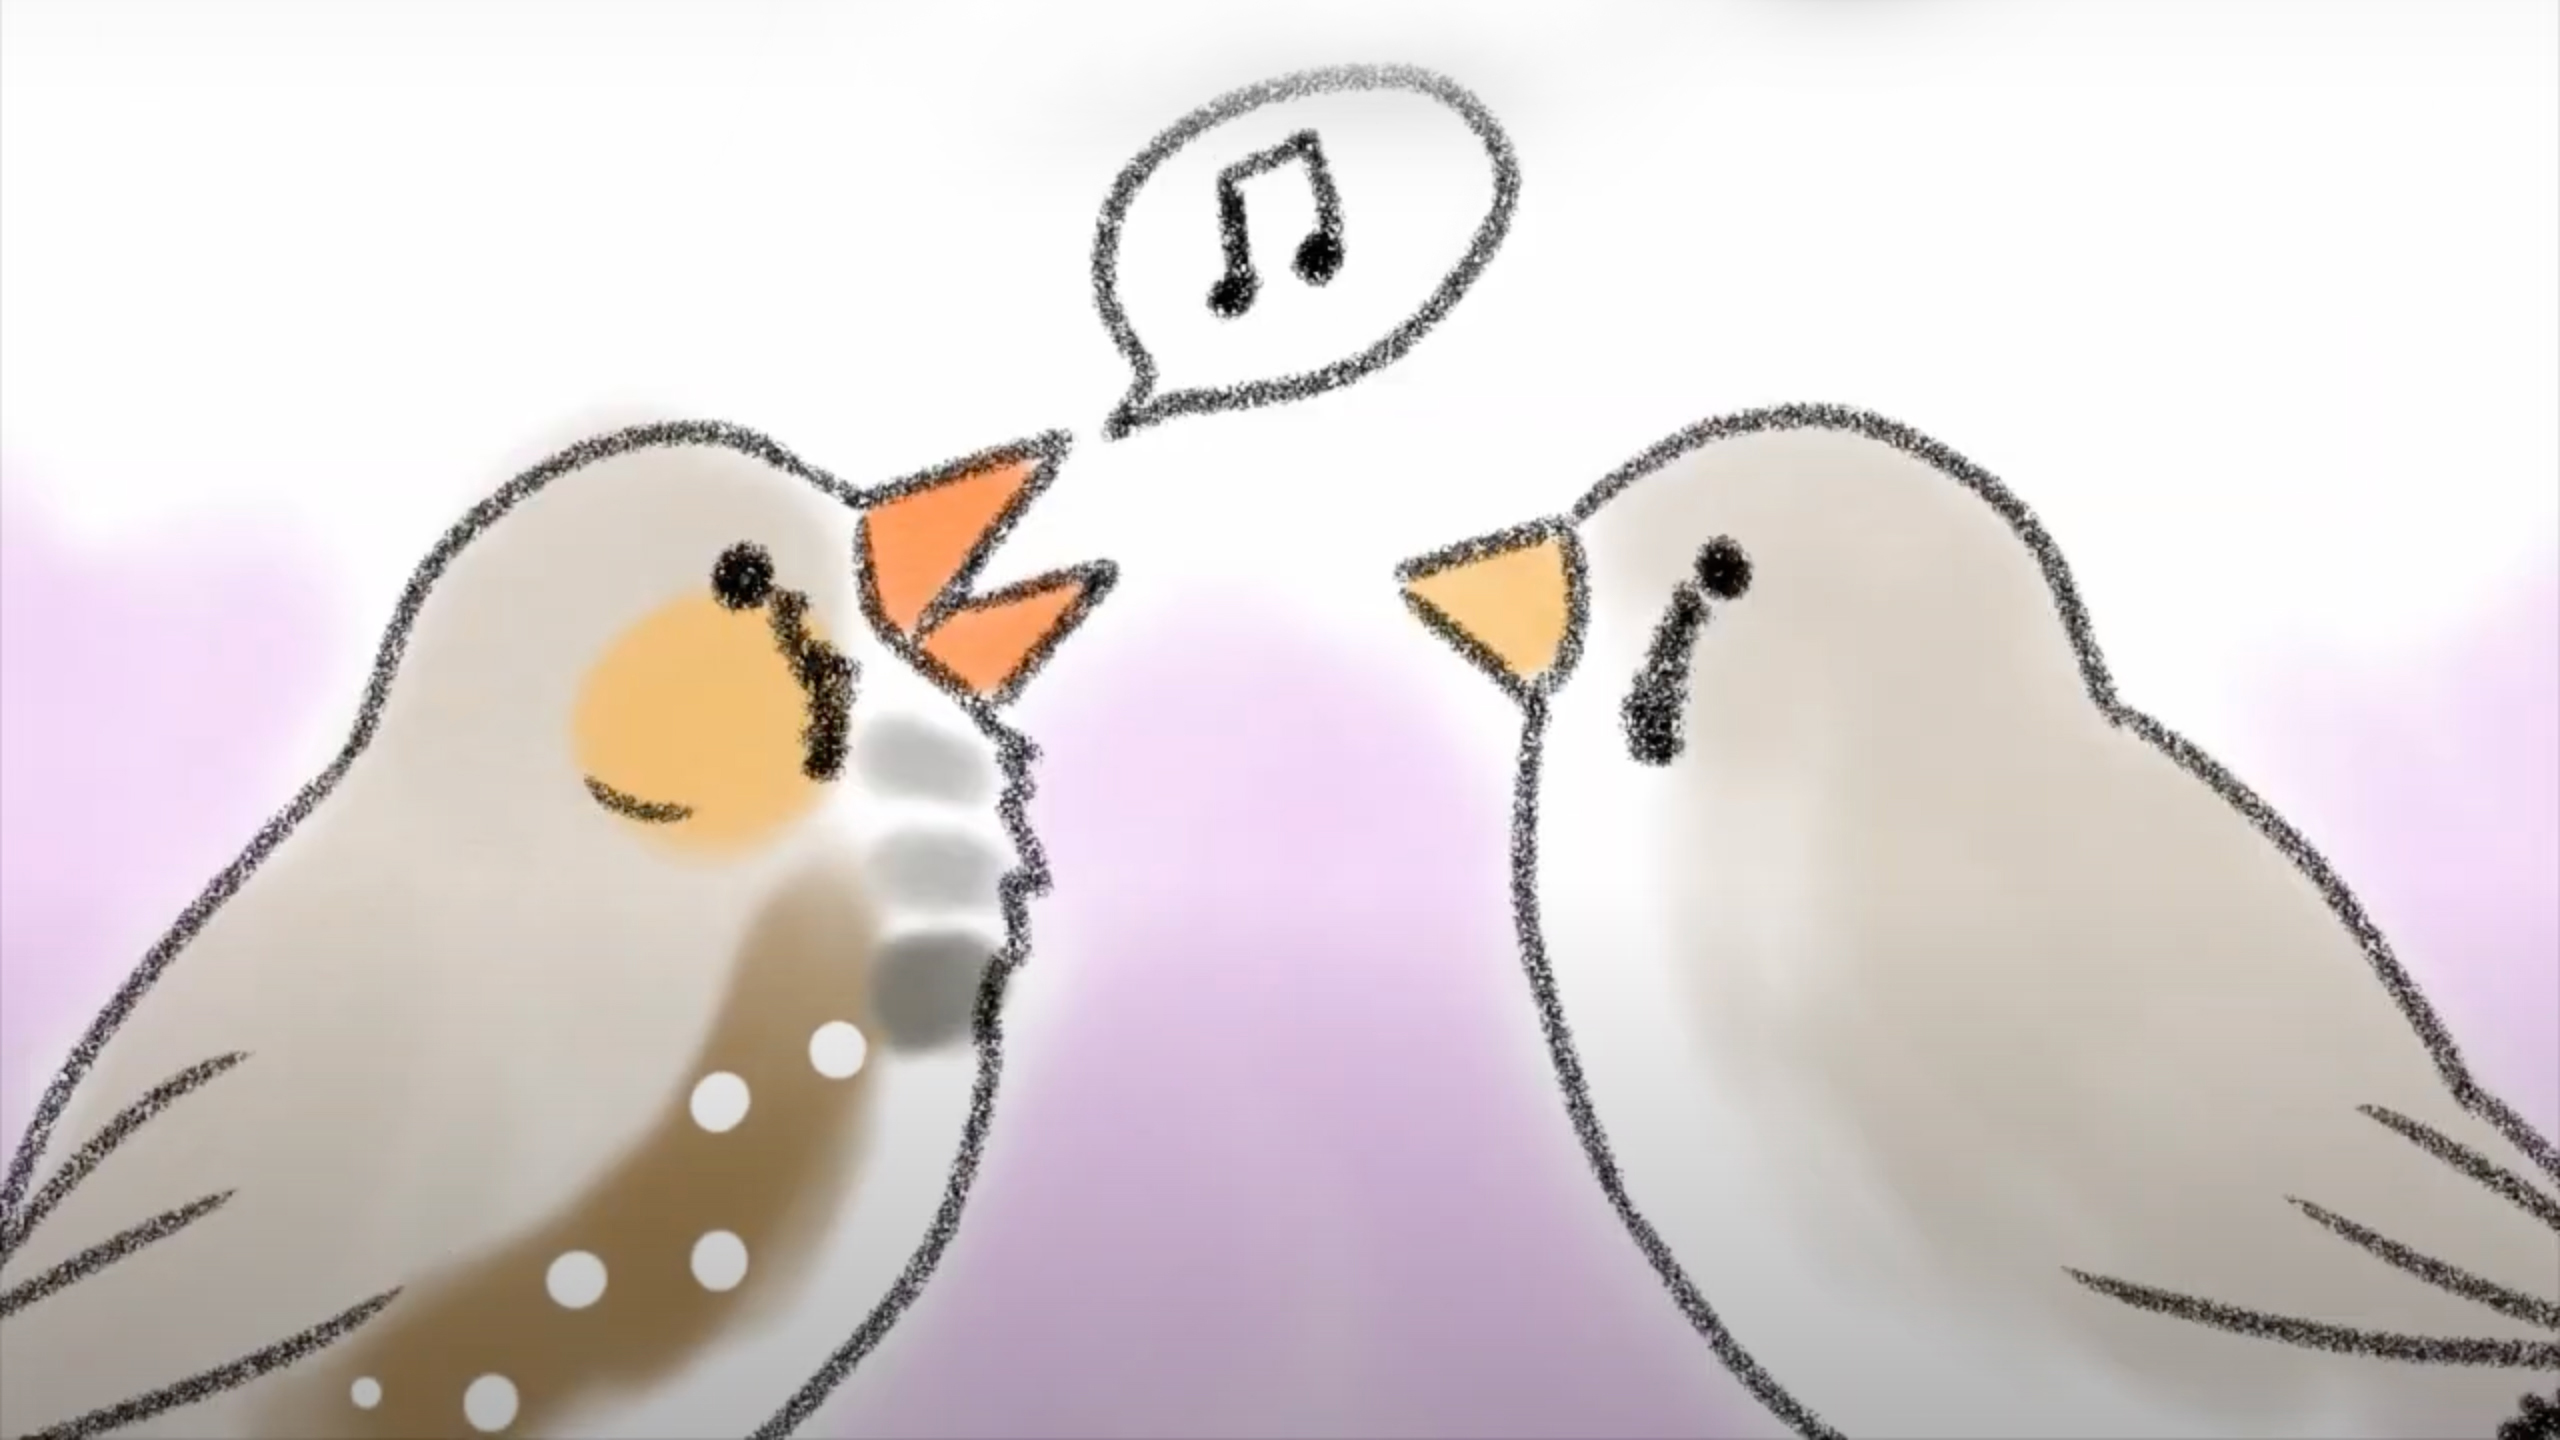 Two zebra finches on a purple background, facing each other with a speech bubble from the one on the left with music notes to signify they are speaking to each other.